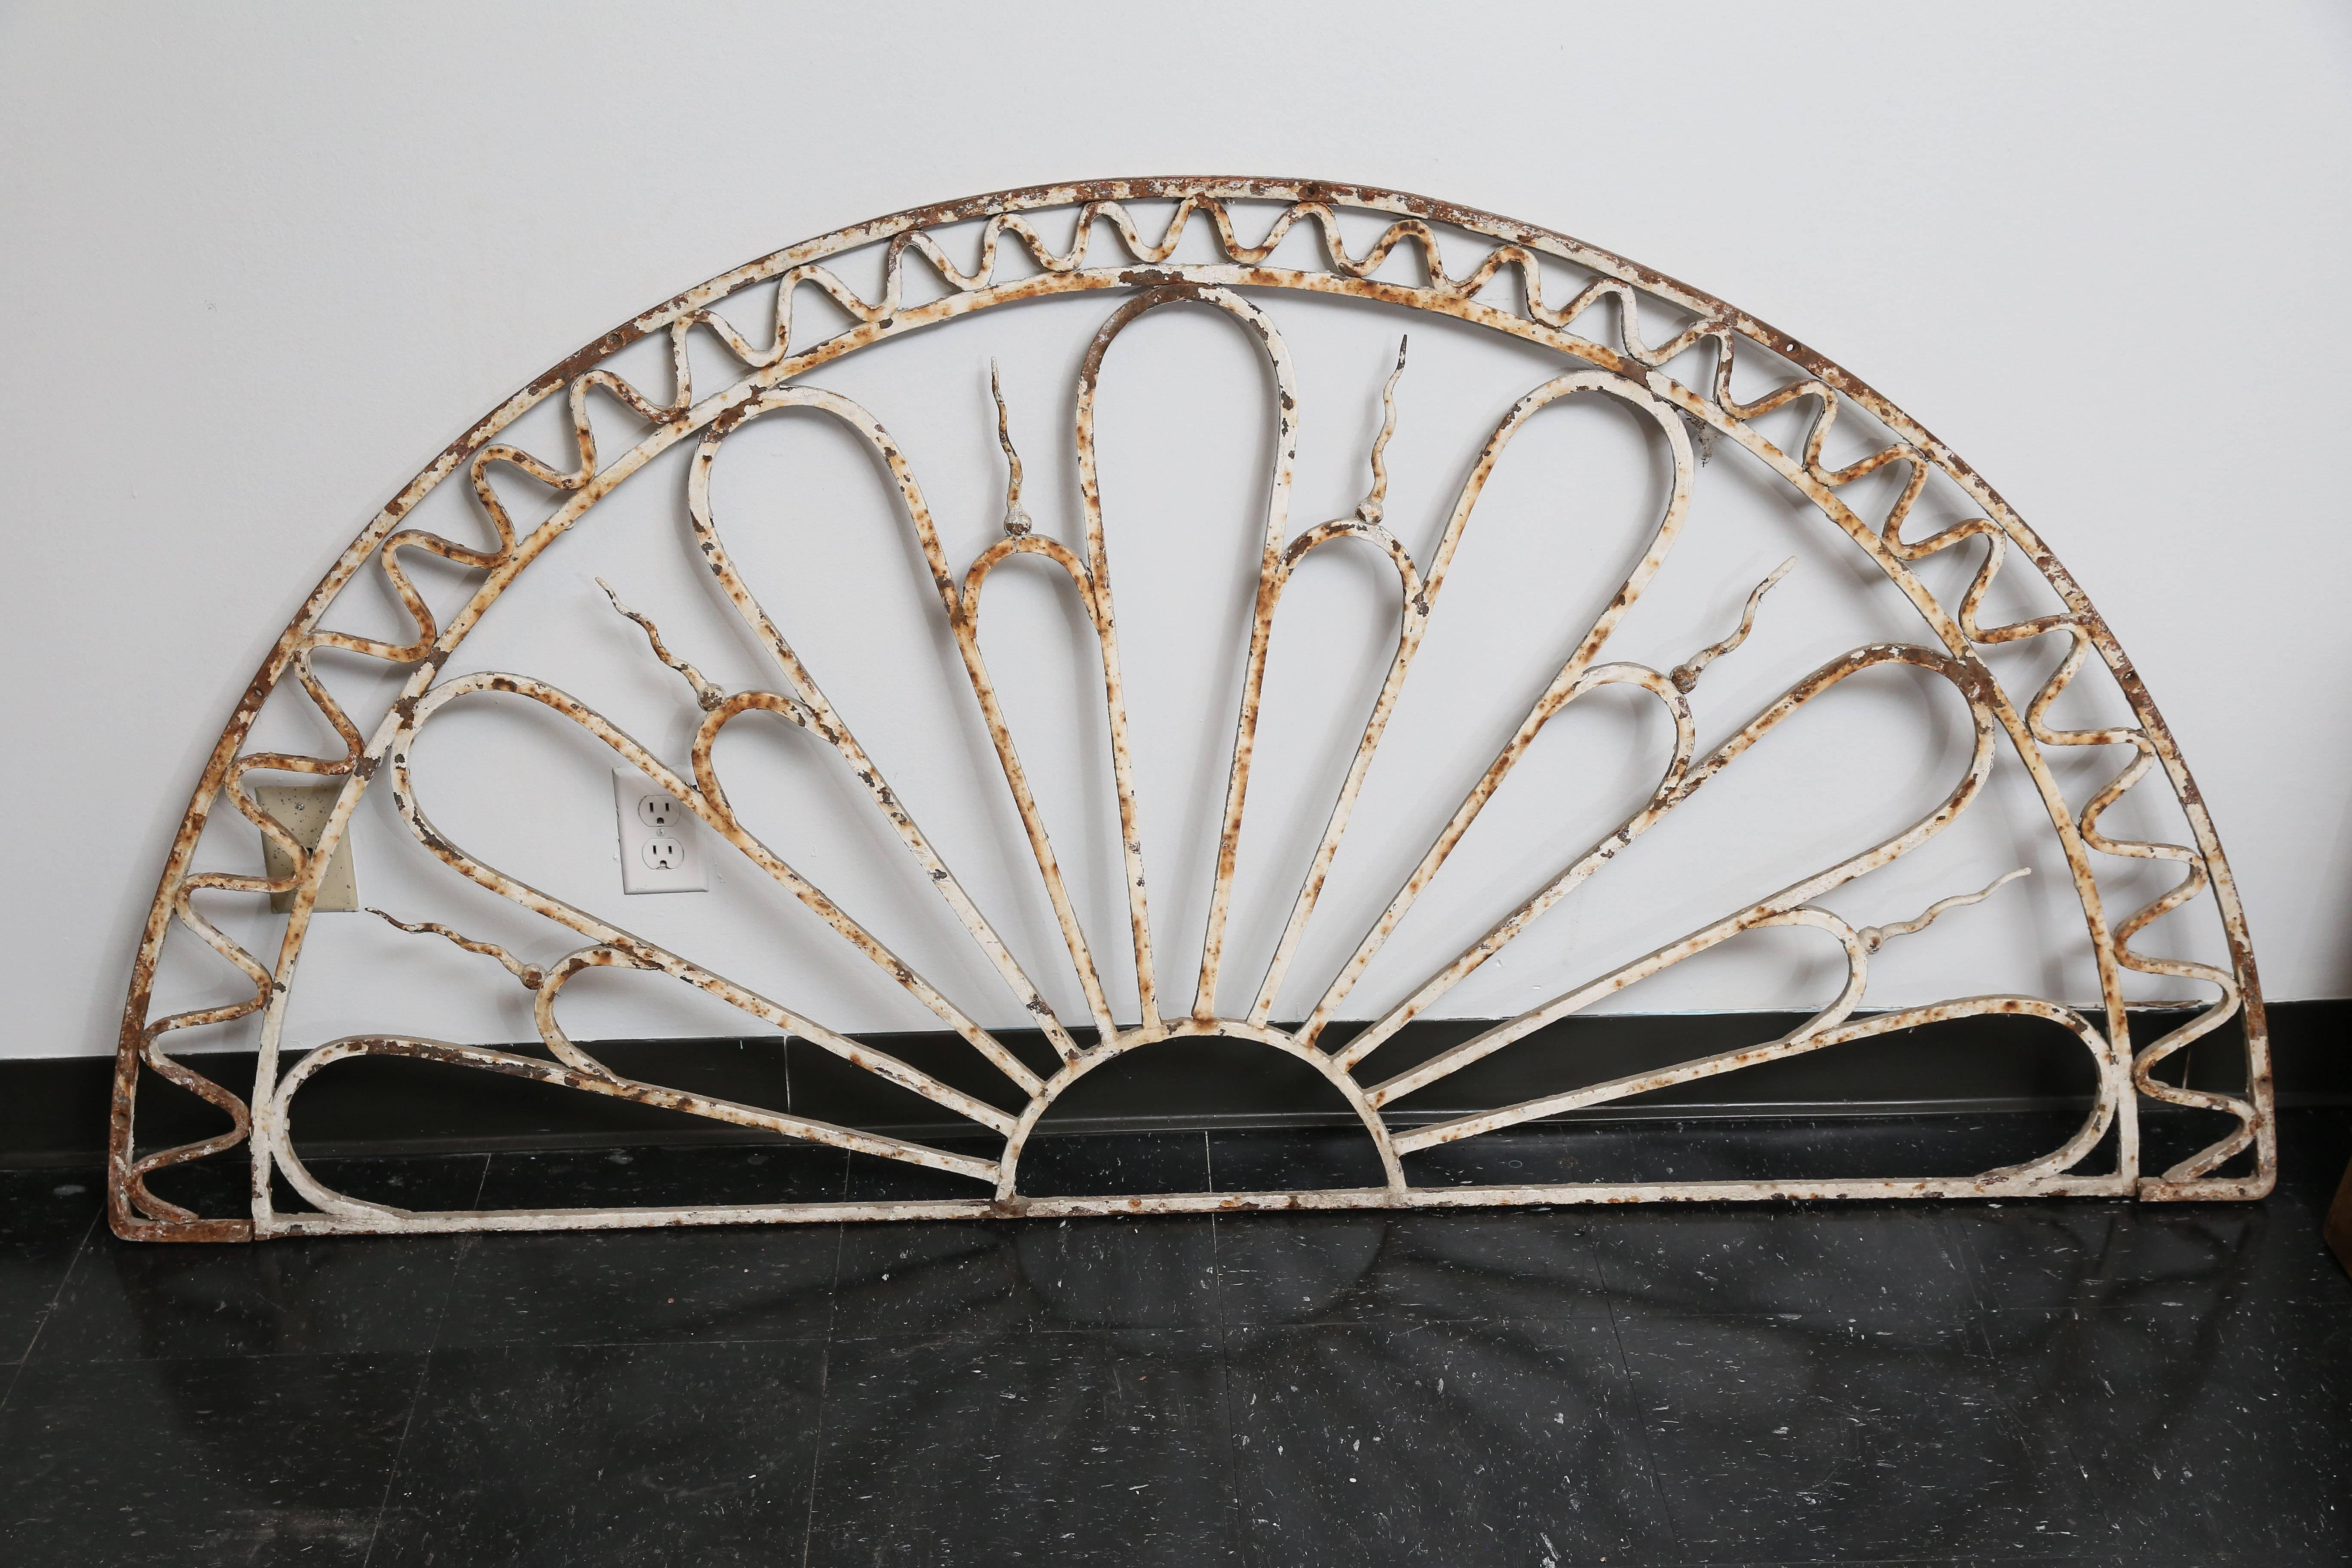 19th century Iron demilune shaped decor showing beautiful workmanship. Could be made into an iron console top or displayed on a wall.